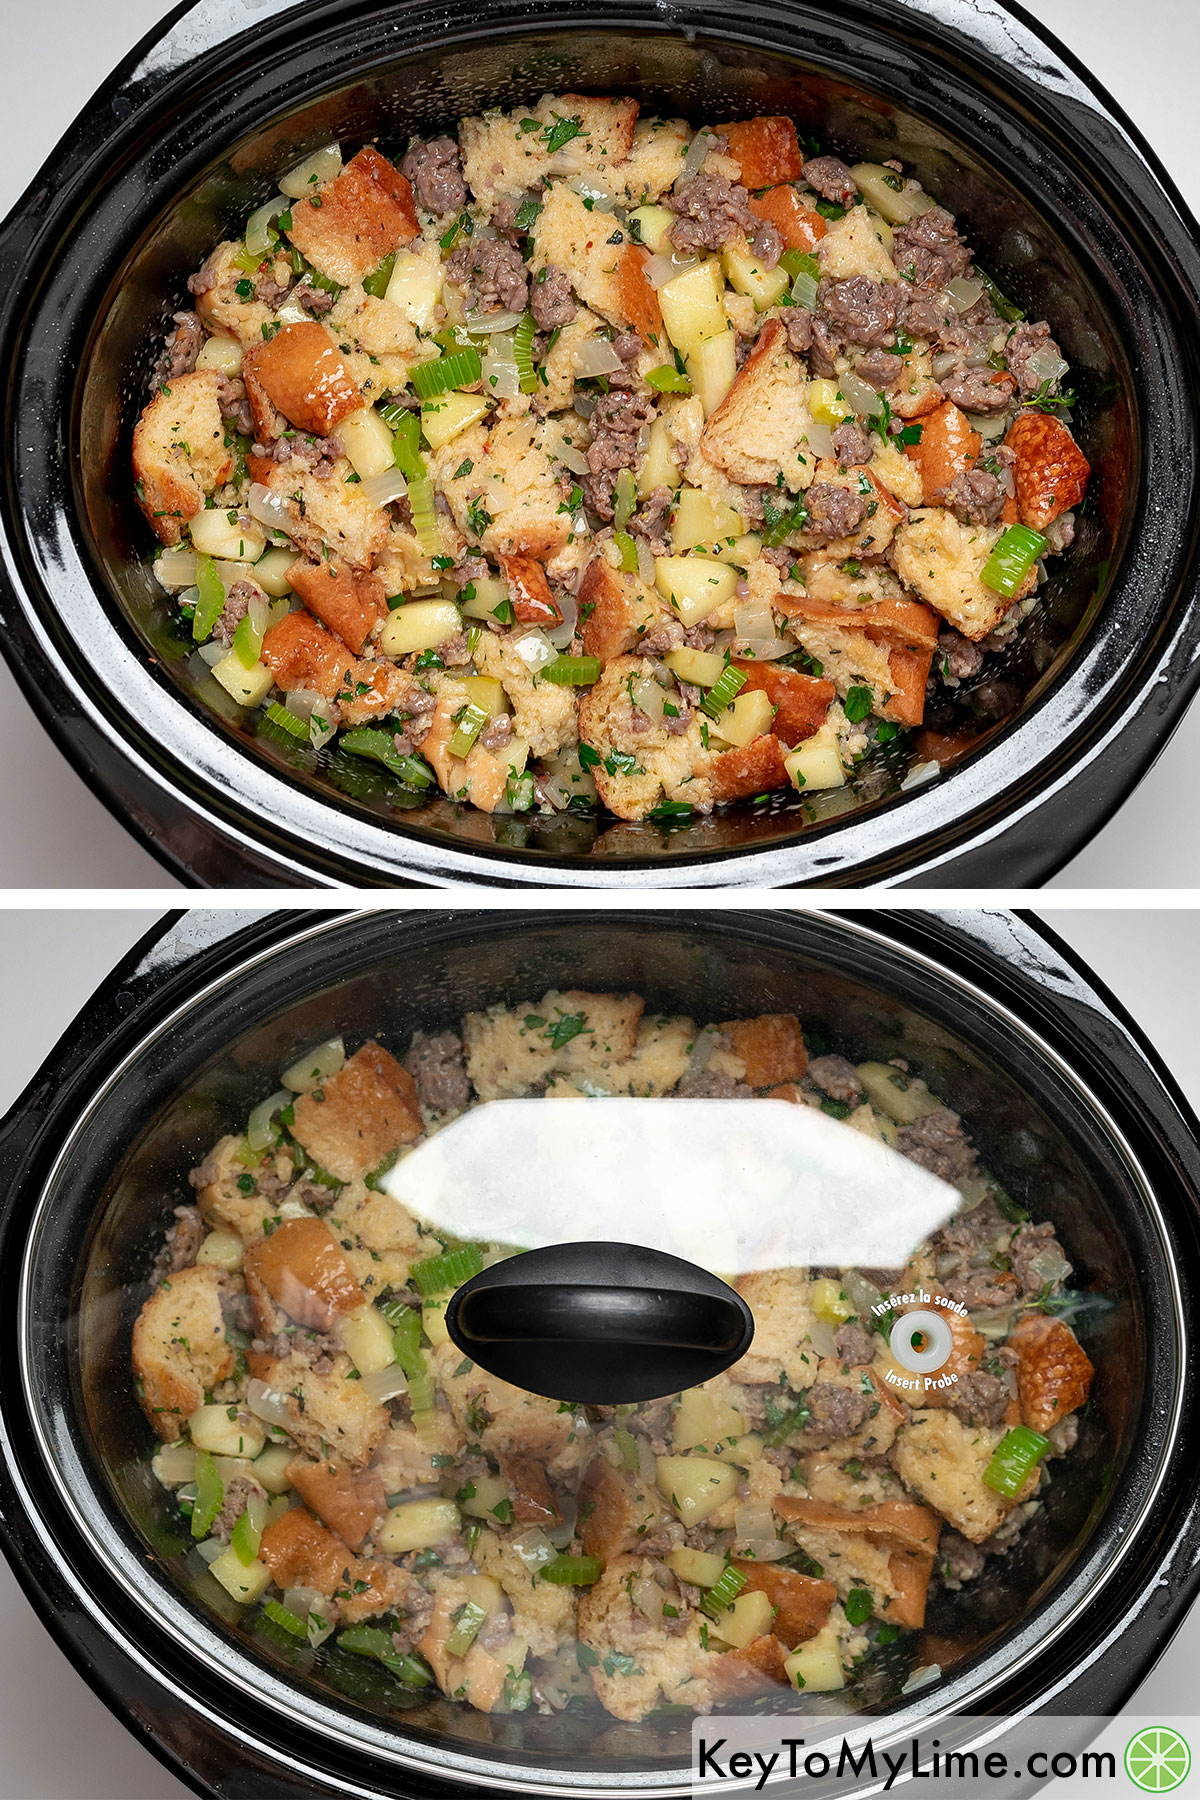 Transferring the stuffing mixture to a 6 quart crock pot and covering with a lid.